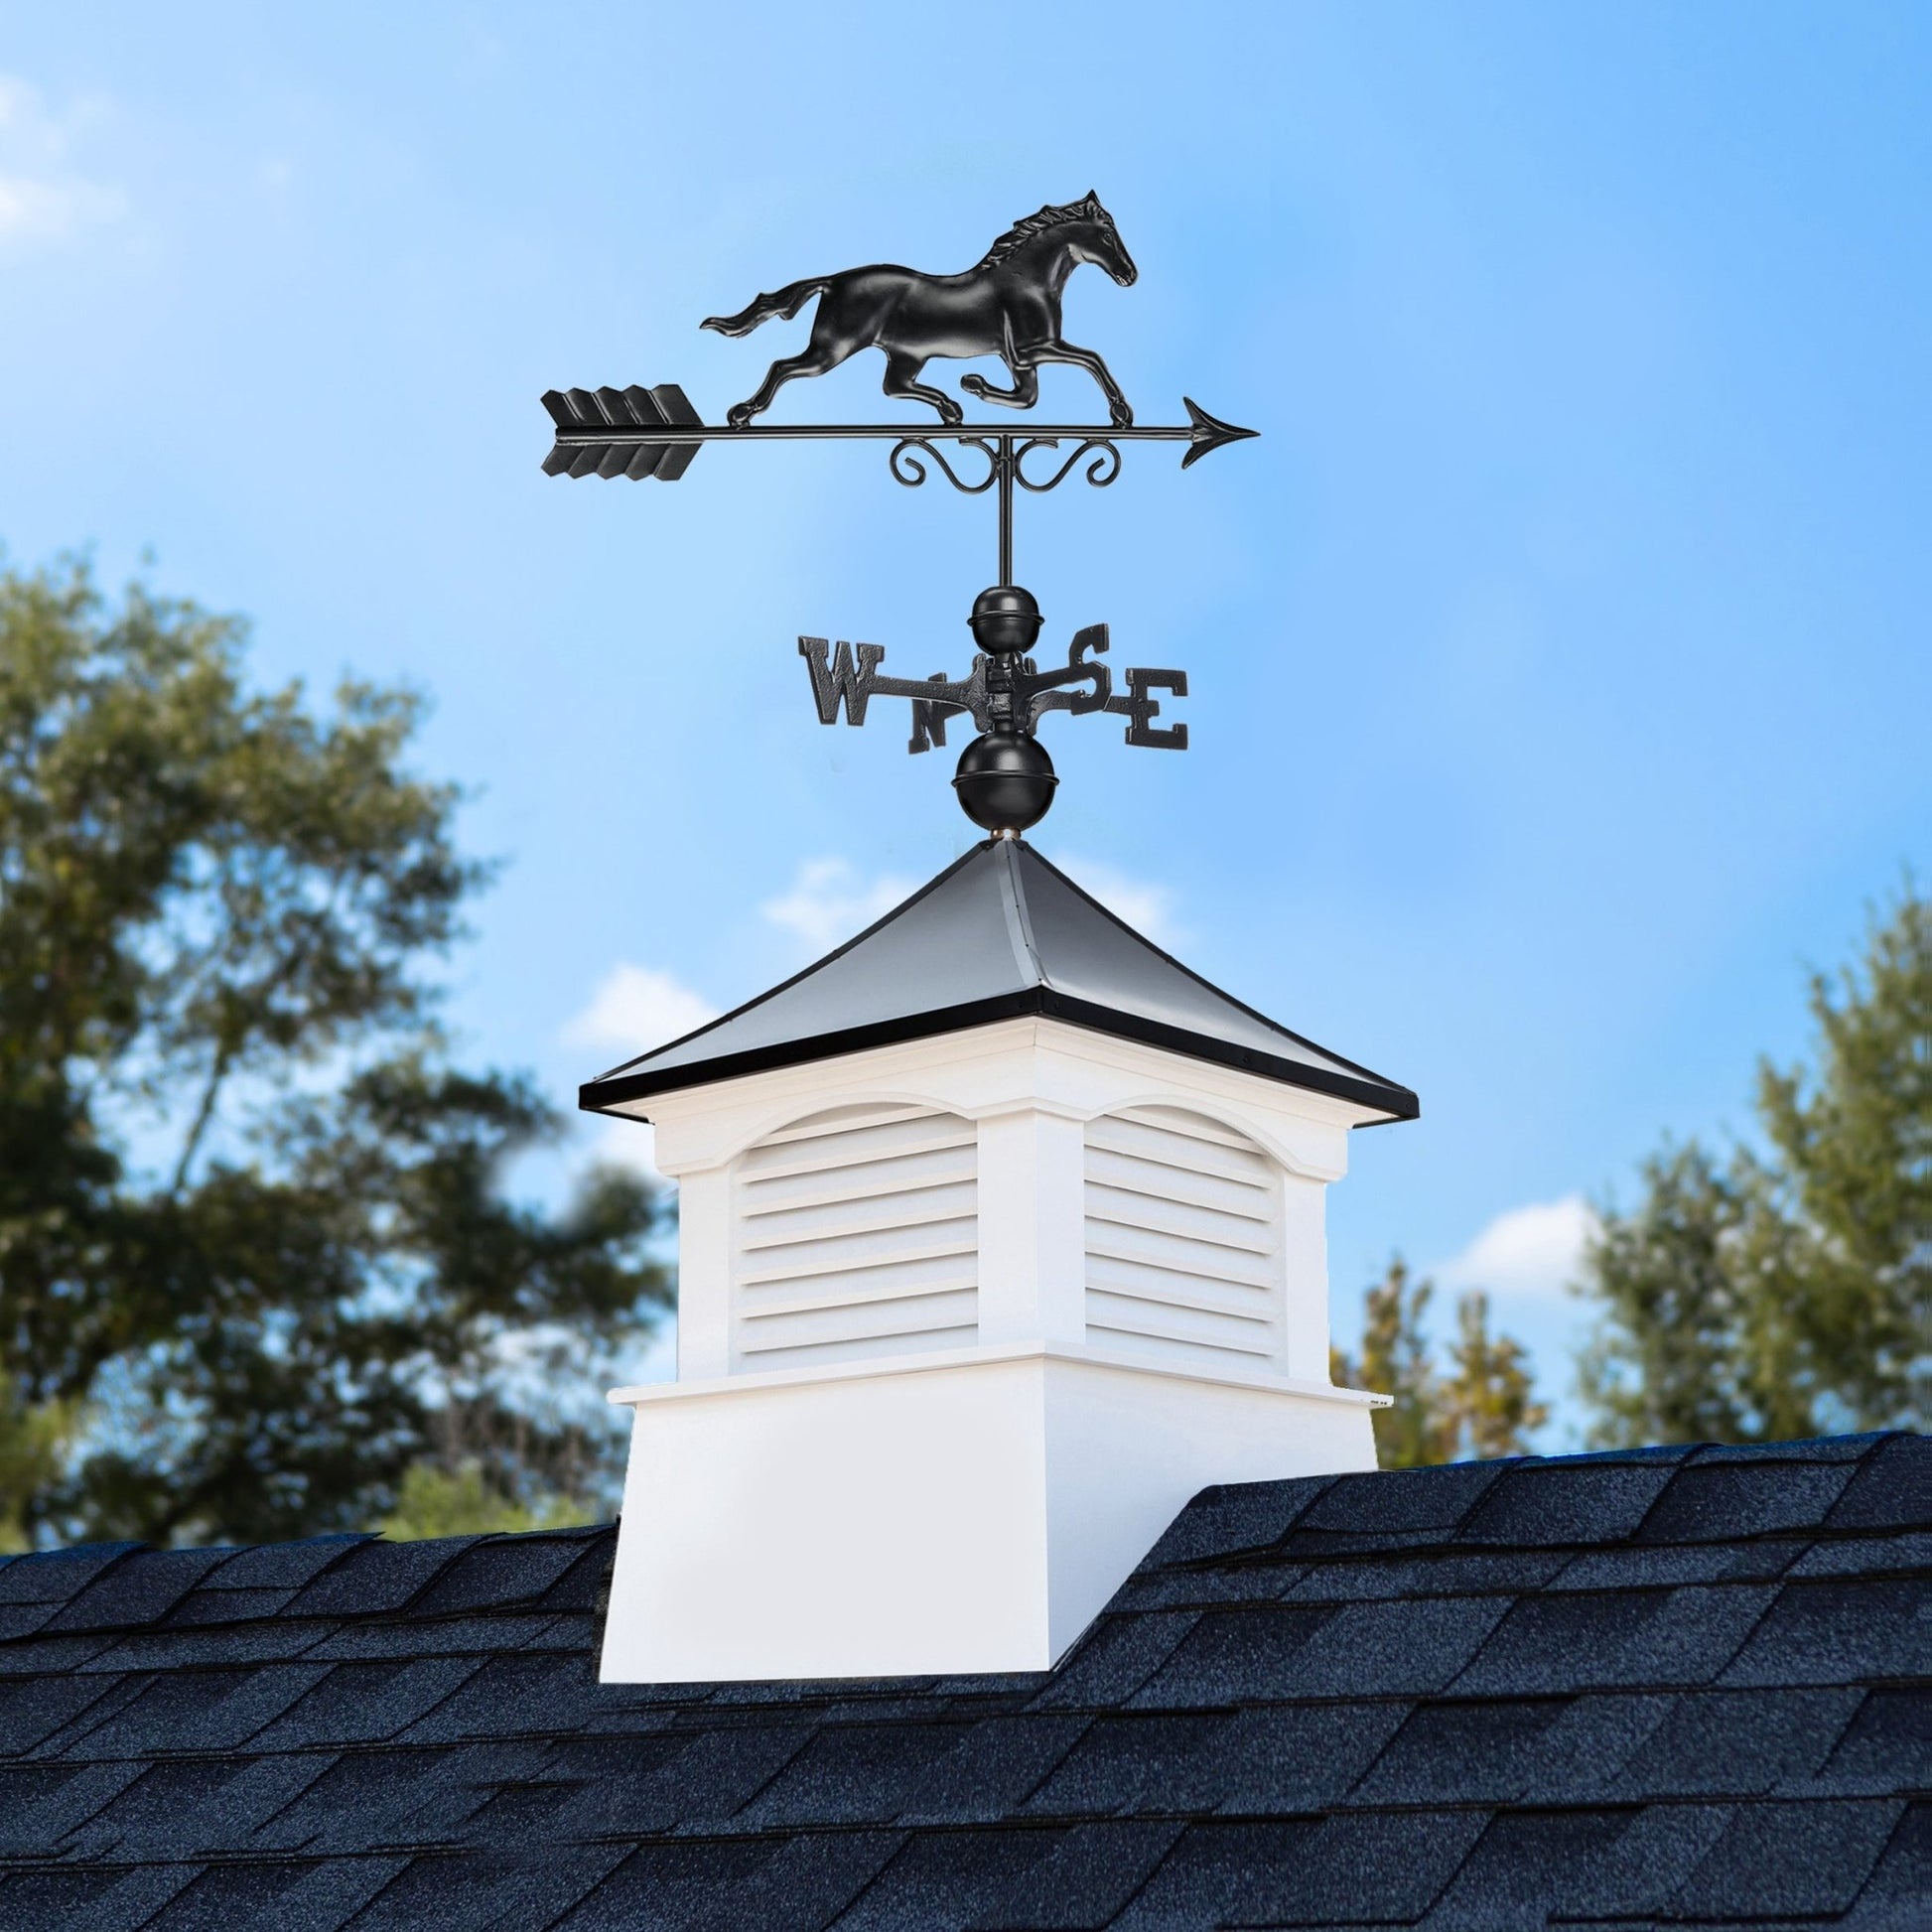 18" Square Coventry Vinyl Cupola with Black Aluminum roof and Black Aluminum Horse Weathervane - Good Directions